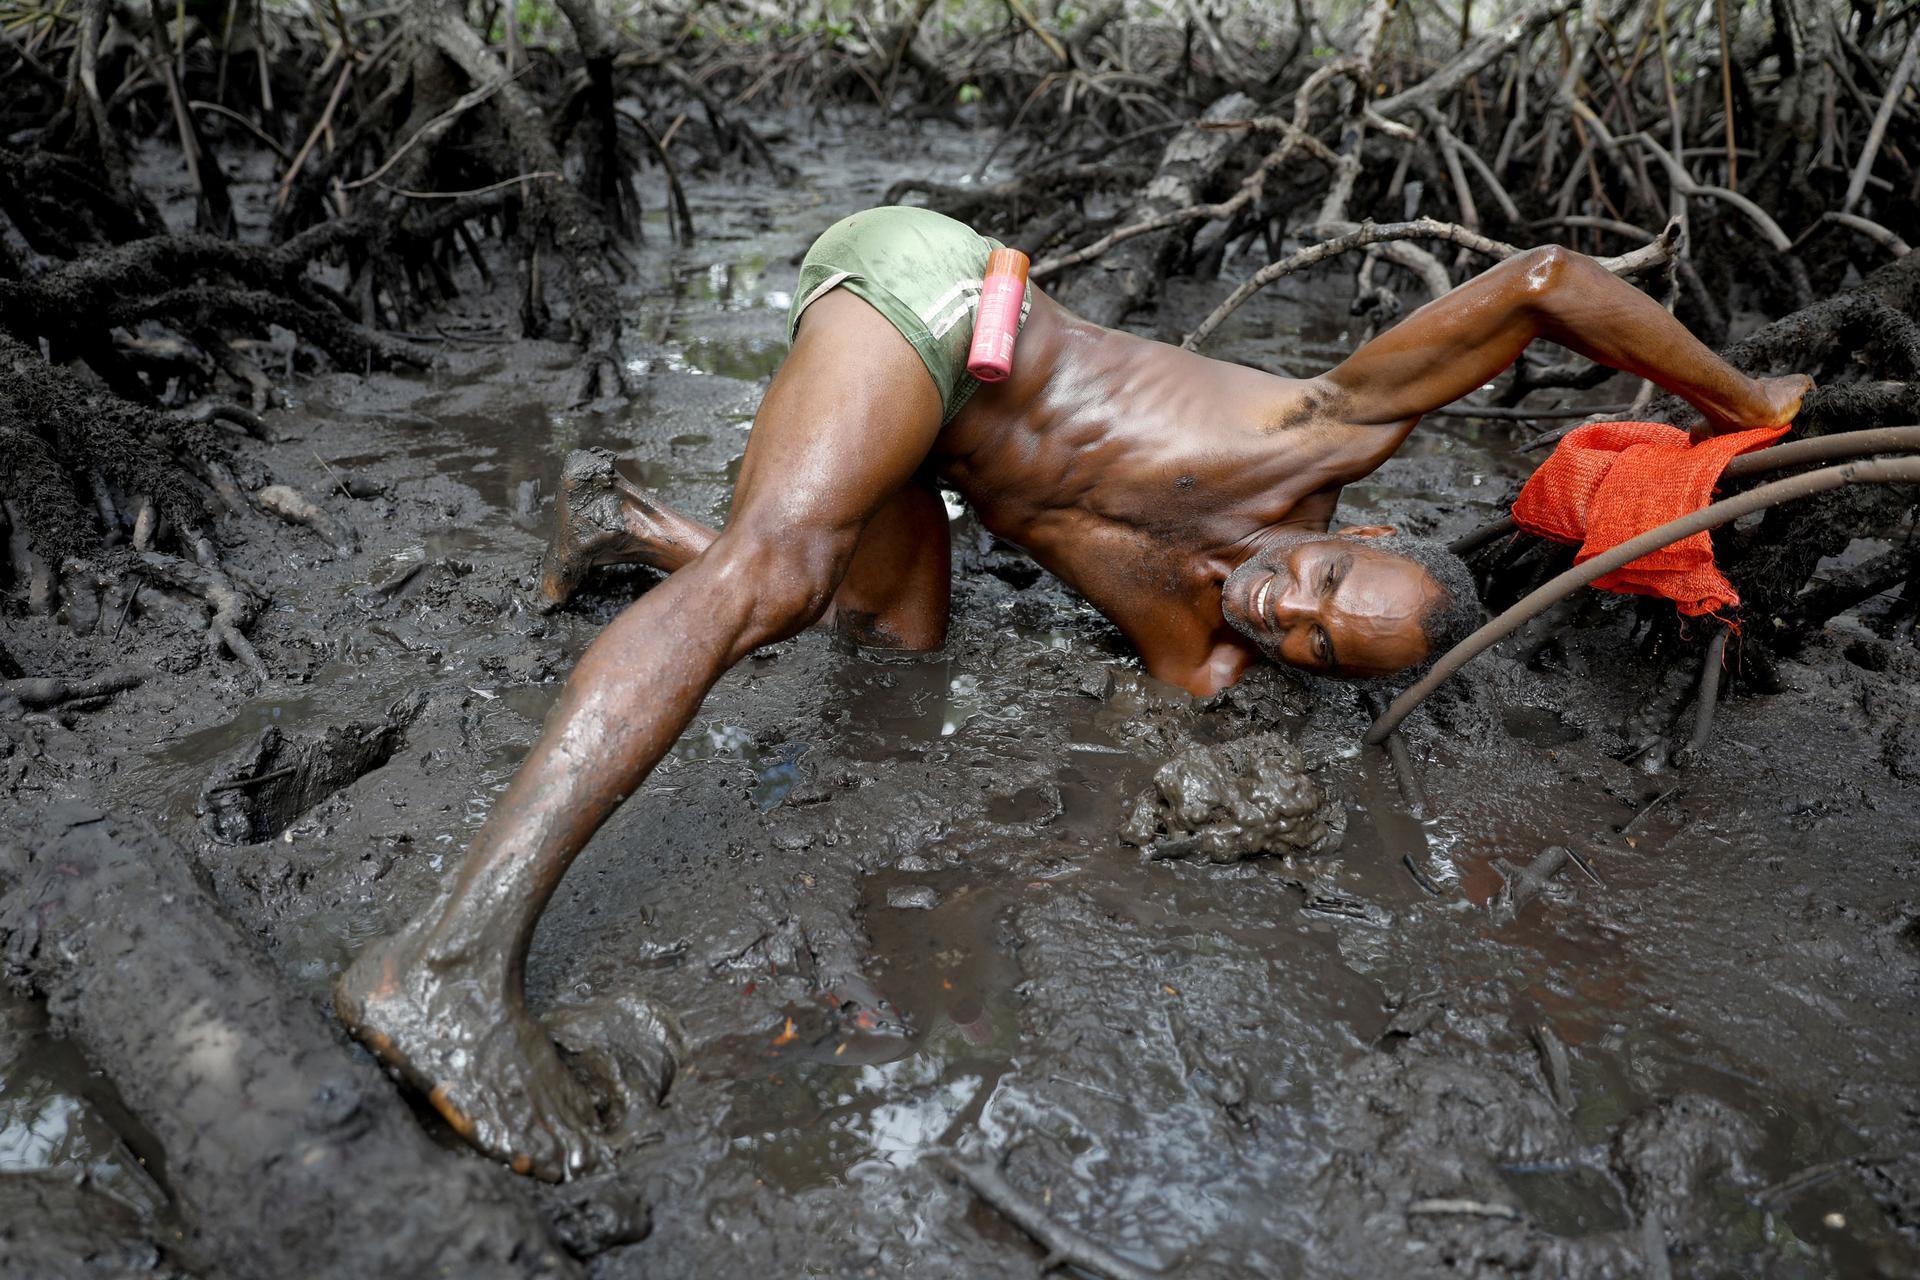 A man is shown laying on mud-covered mangroves wearing only green shorts with his left arm in the mud to his shoulder.